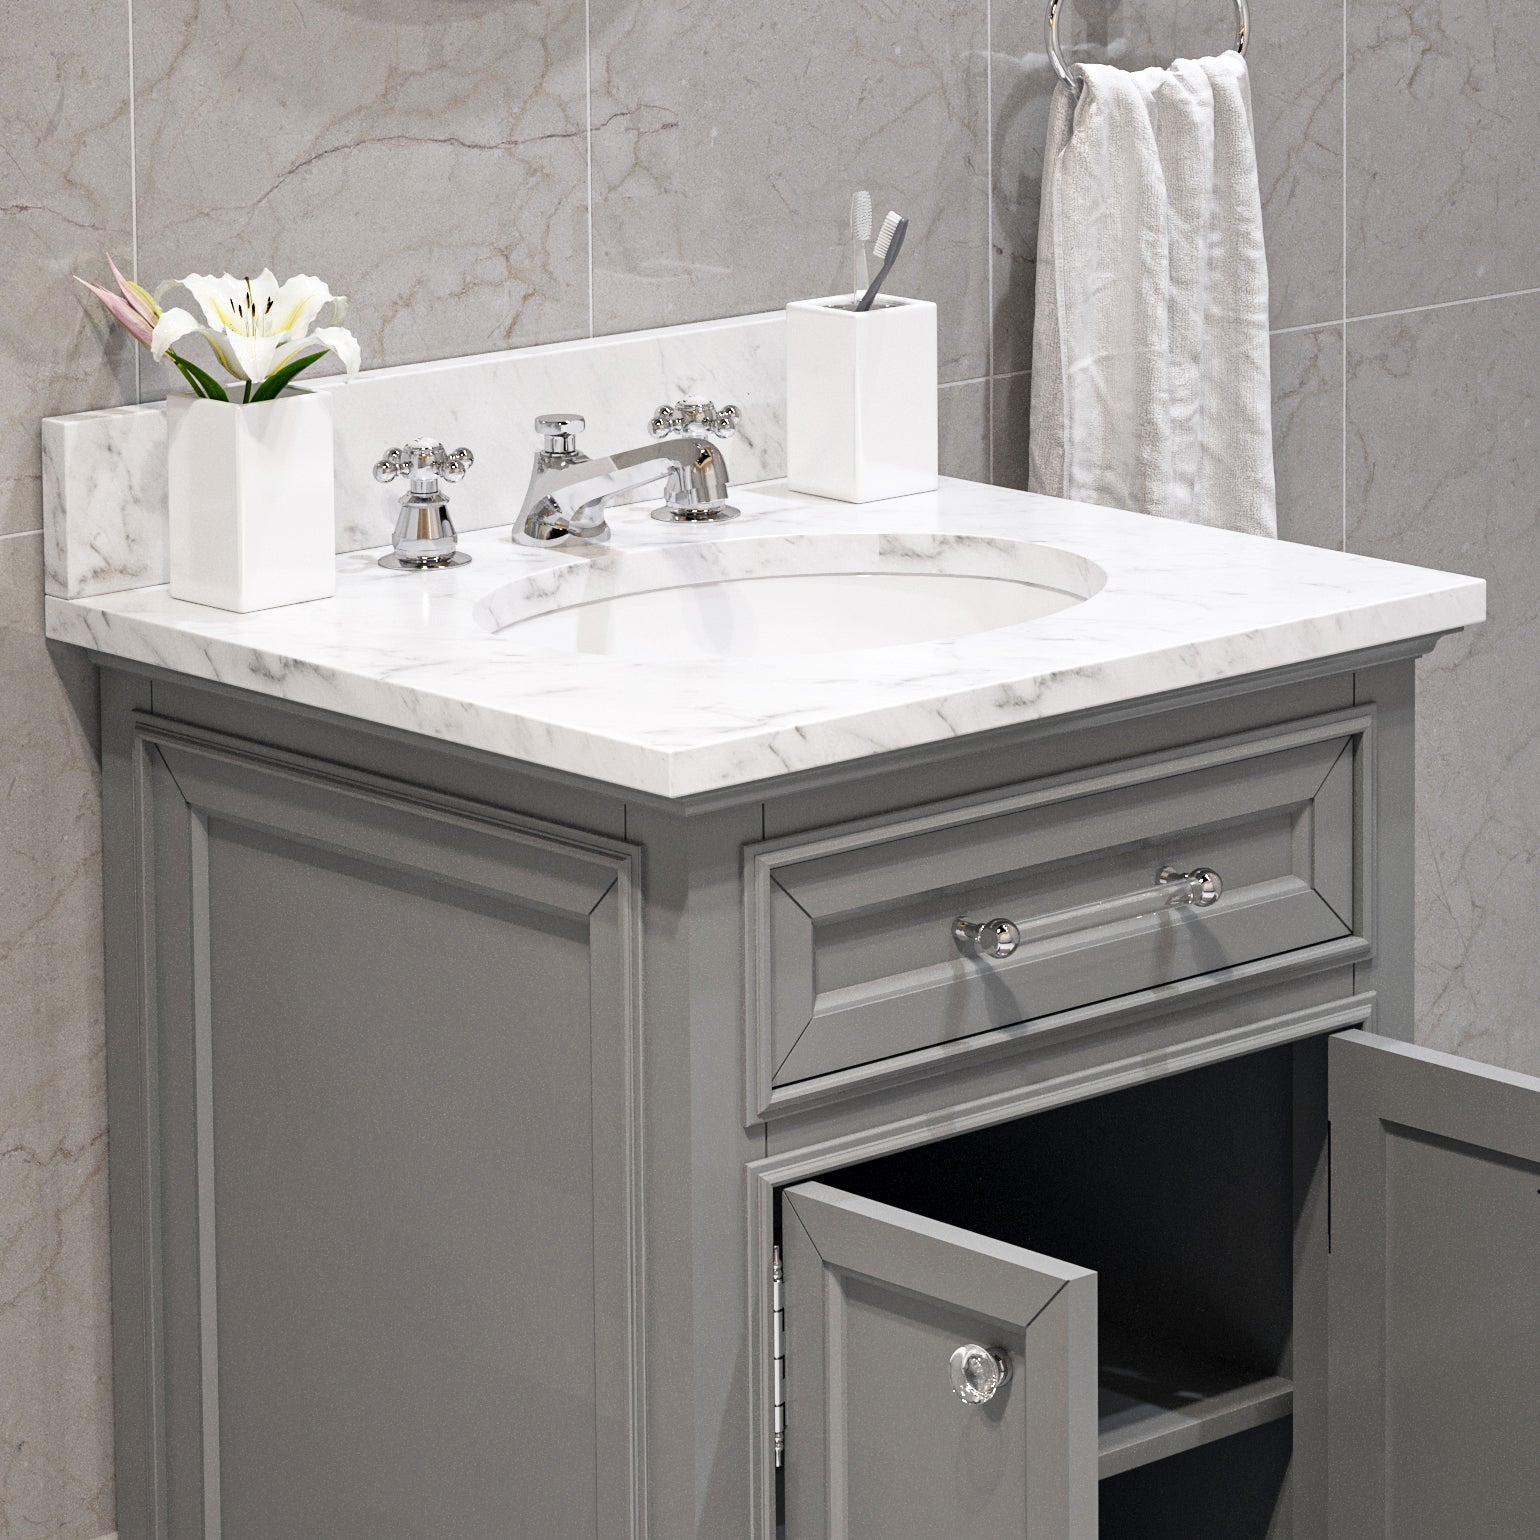 DERBY 24"W x 34"H Cashmere Gray Single-Sink Vanity with Carrara White Marble Countertop + Mirror